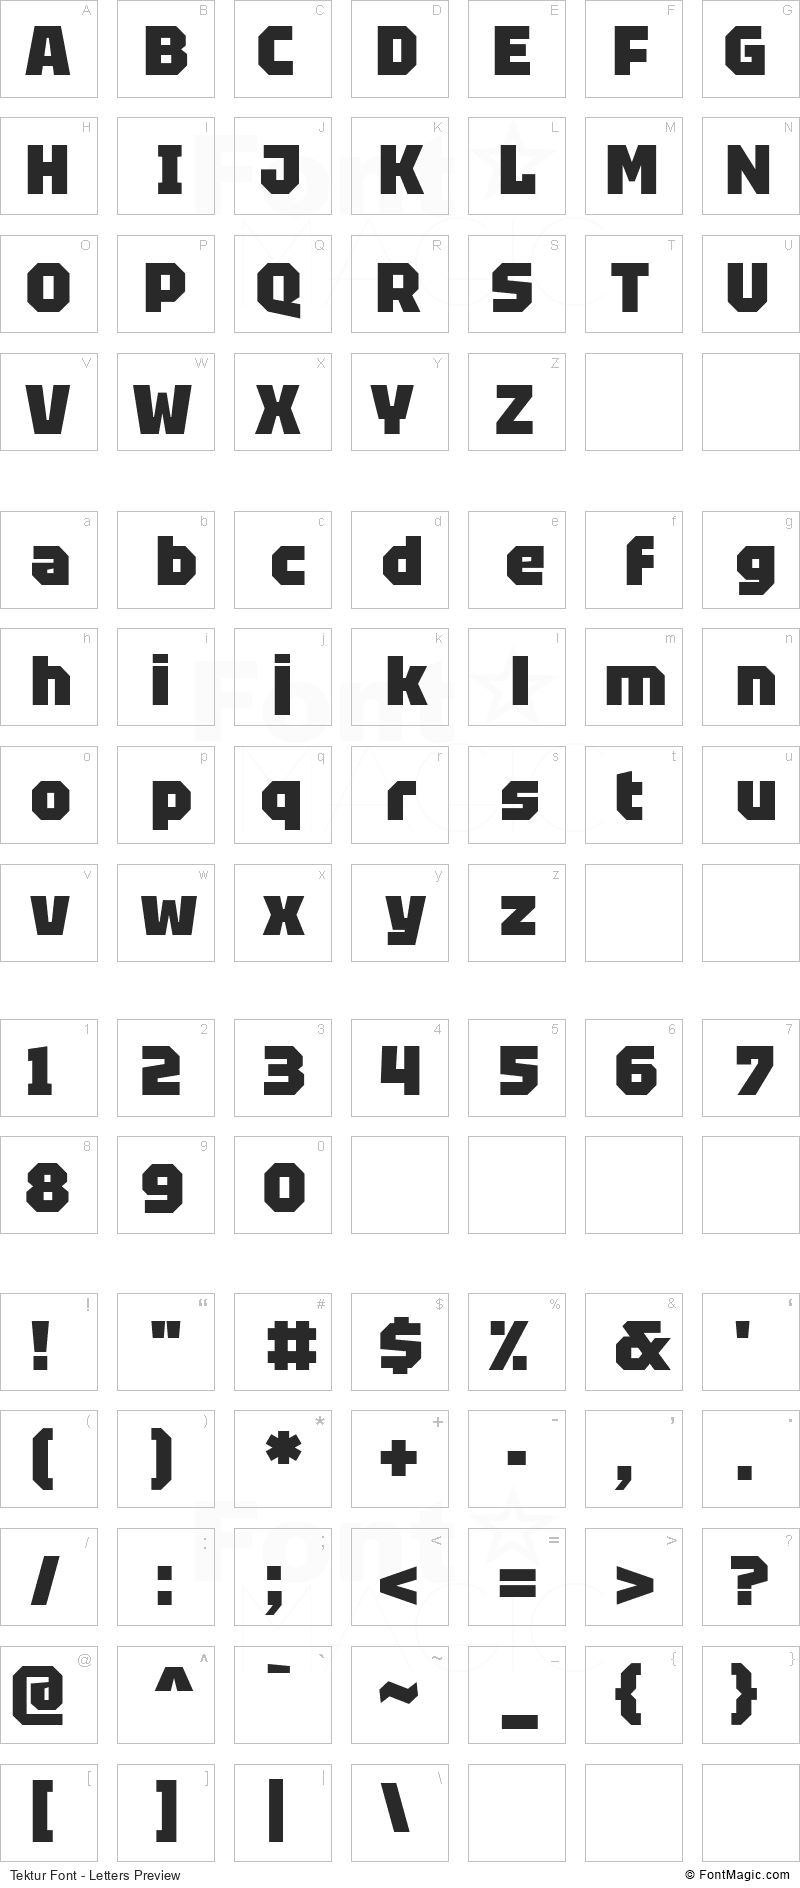 Tektur Font - All Latters Preview Chart